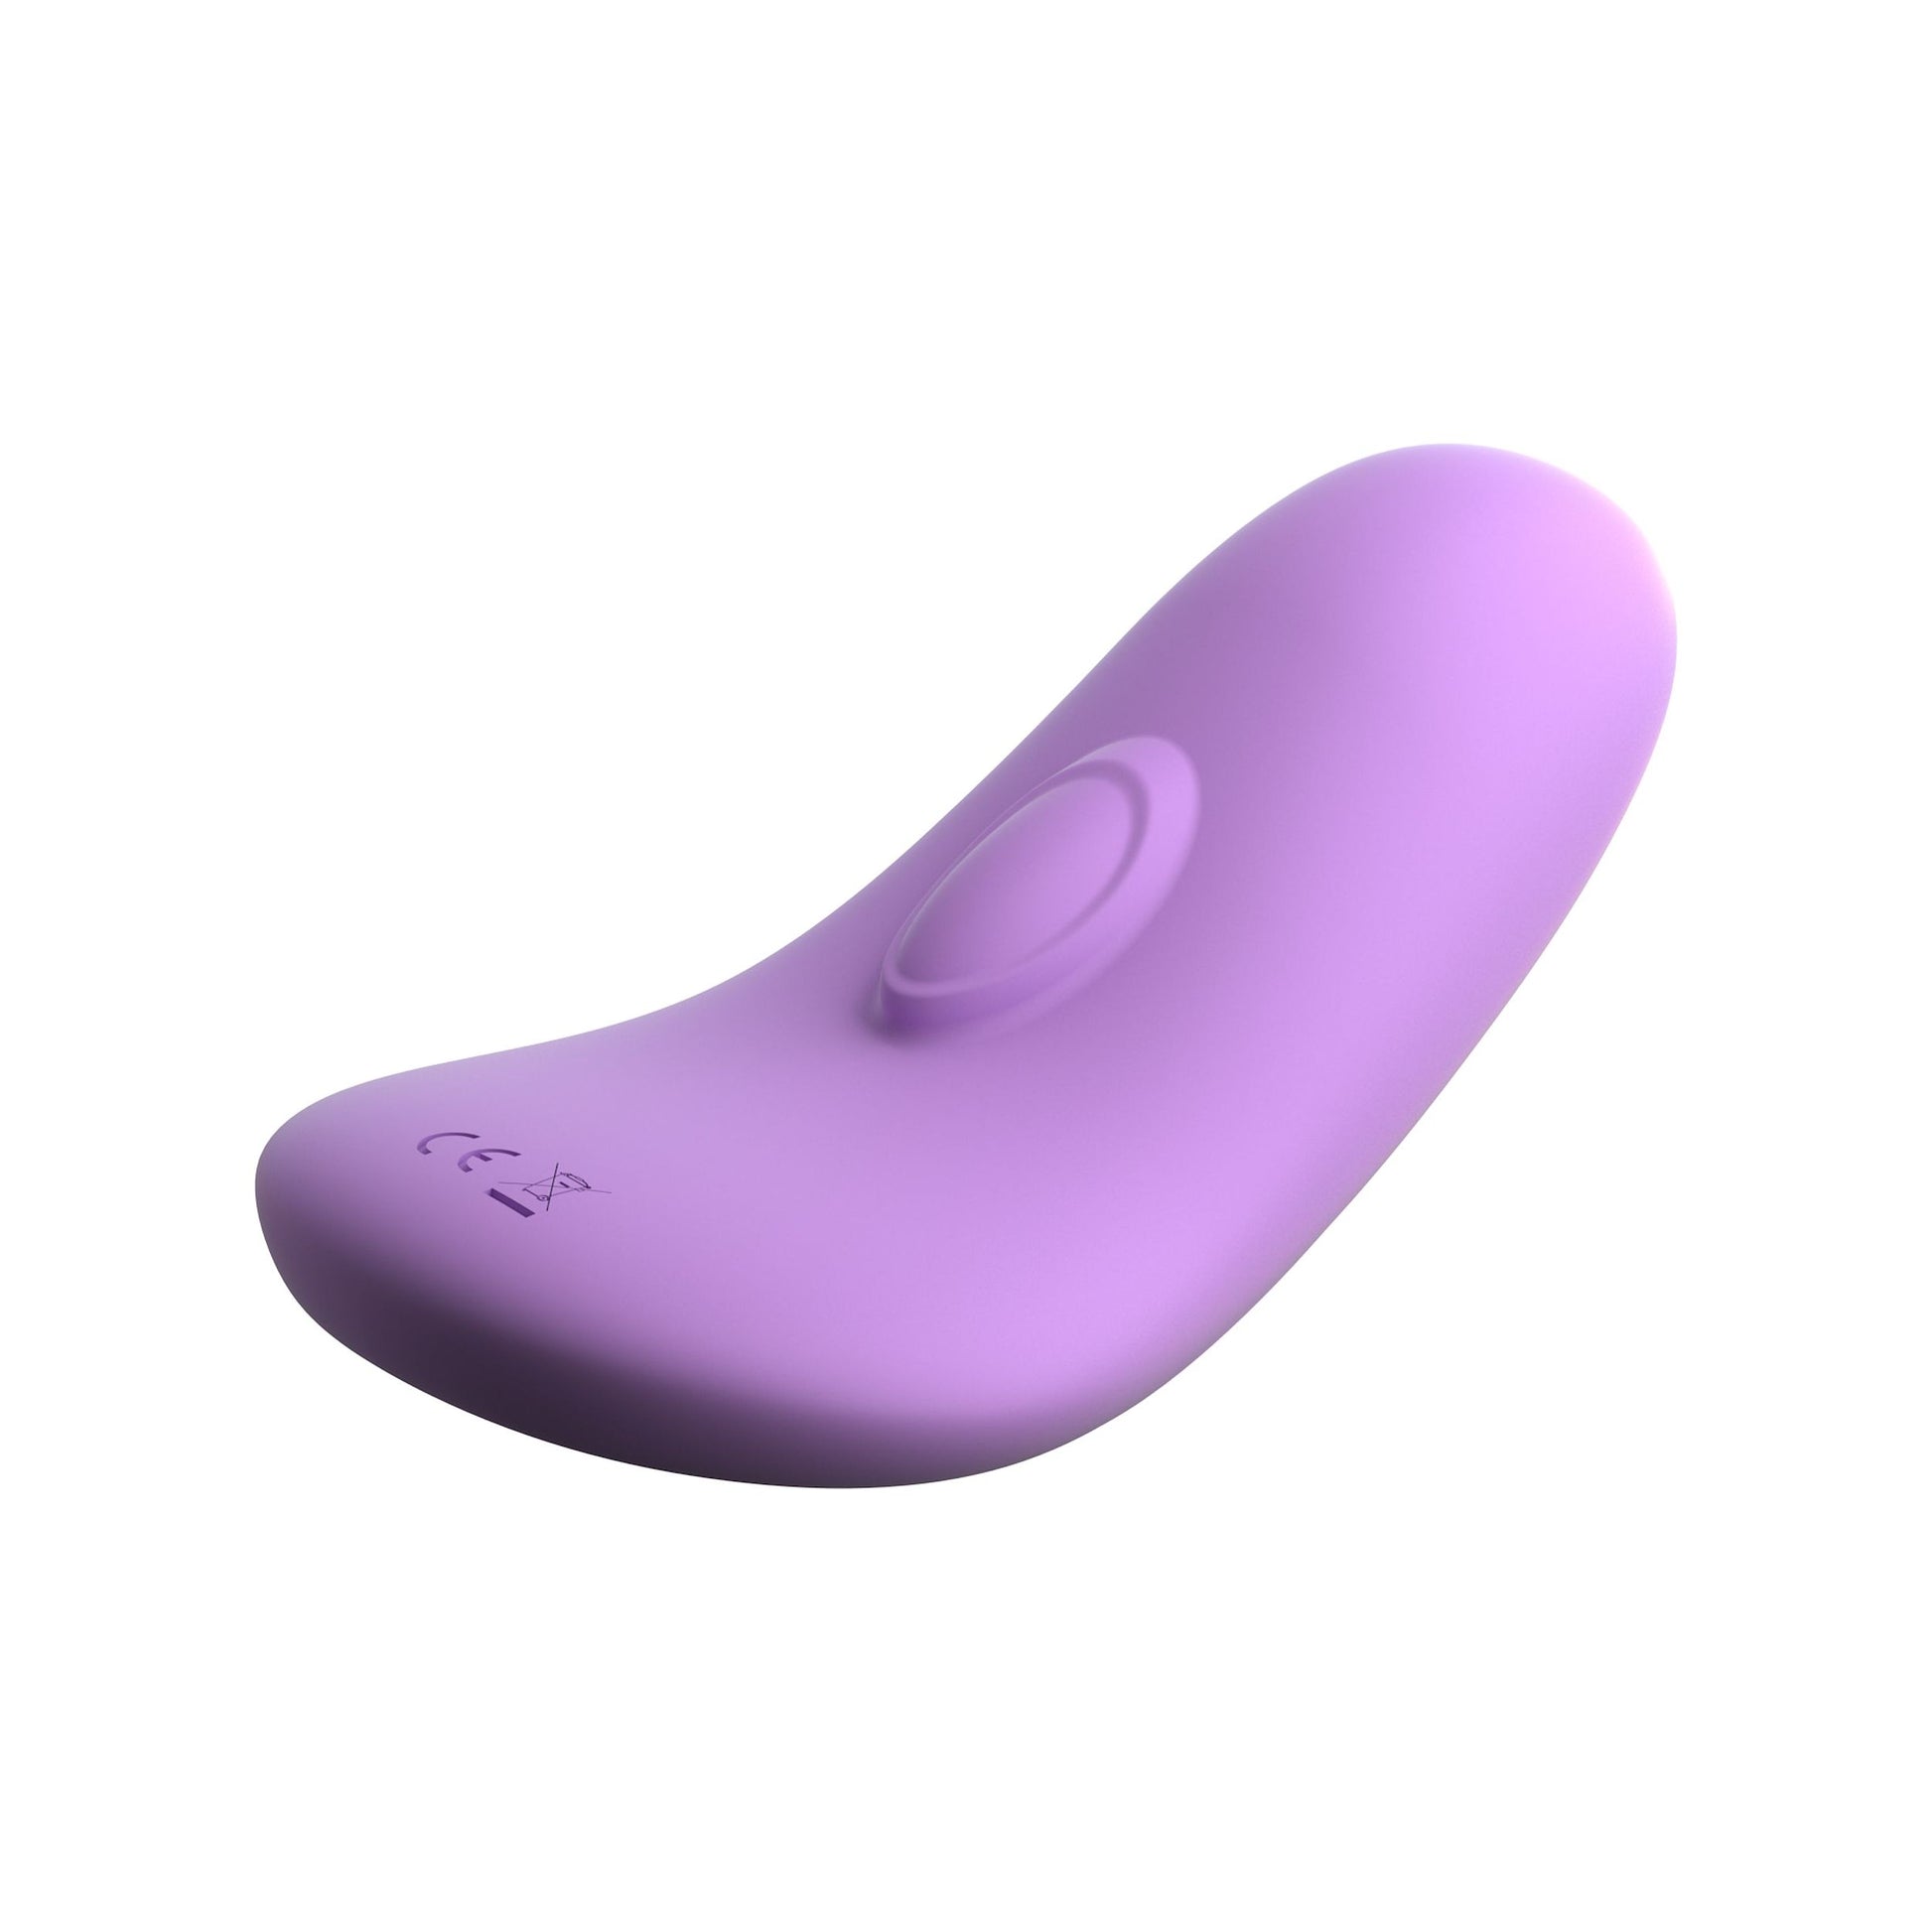 Fantasy For Her Remote Silicone Please-Her - My Temptations Sex Toys